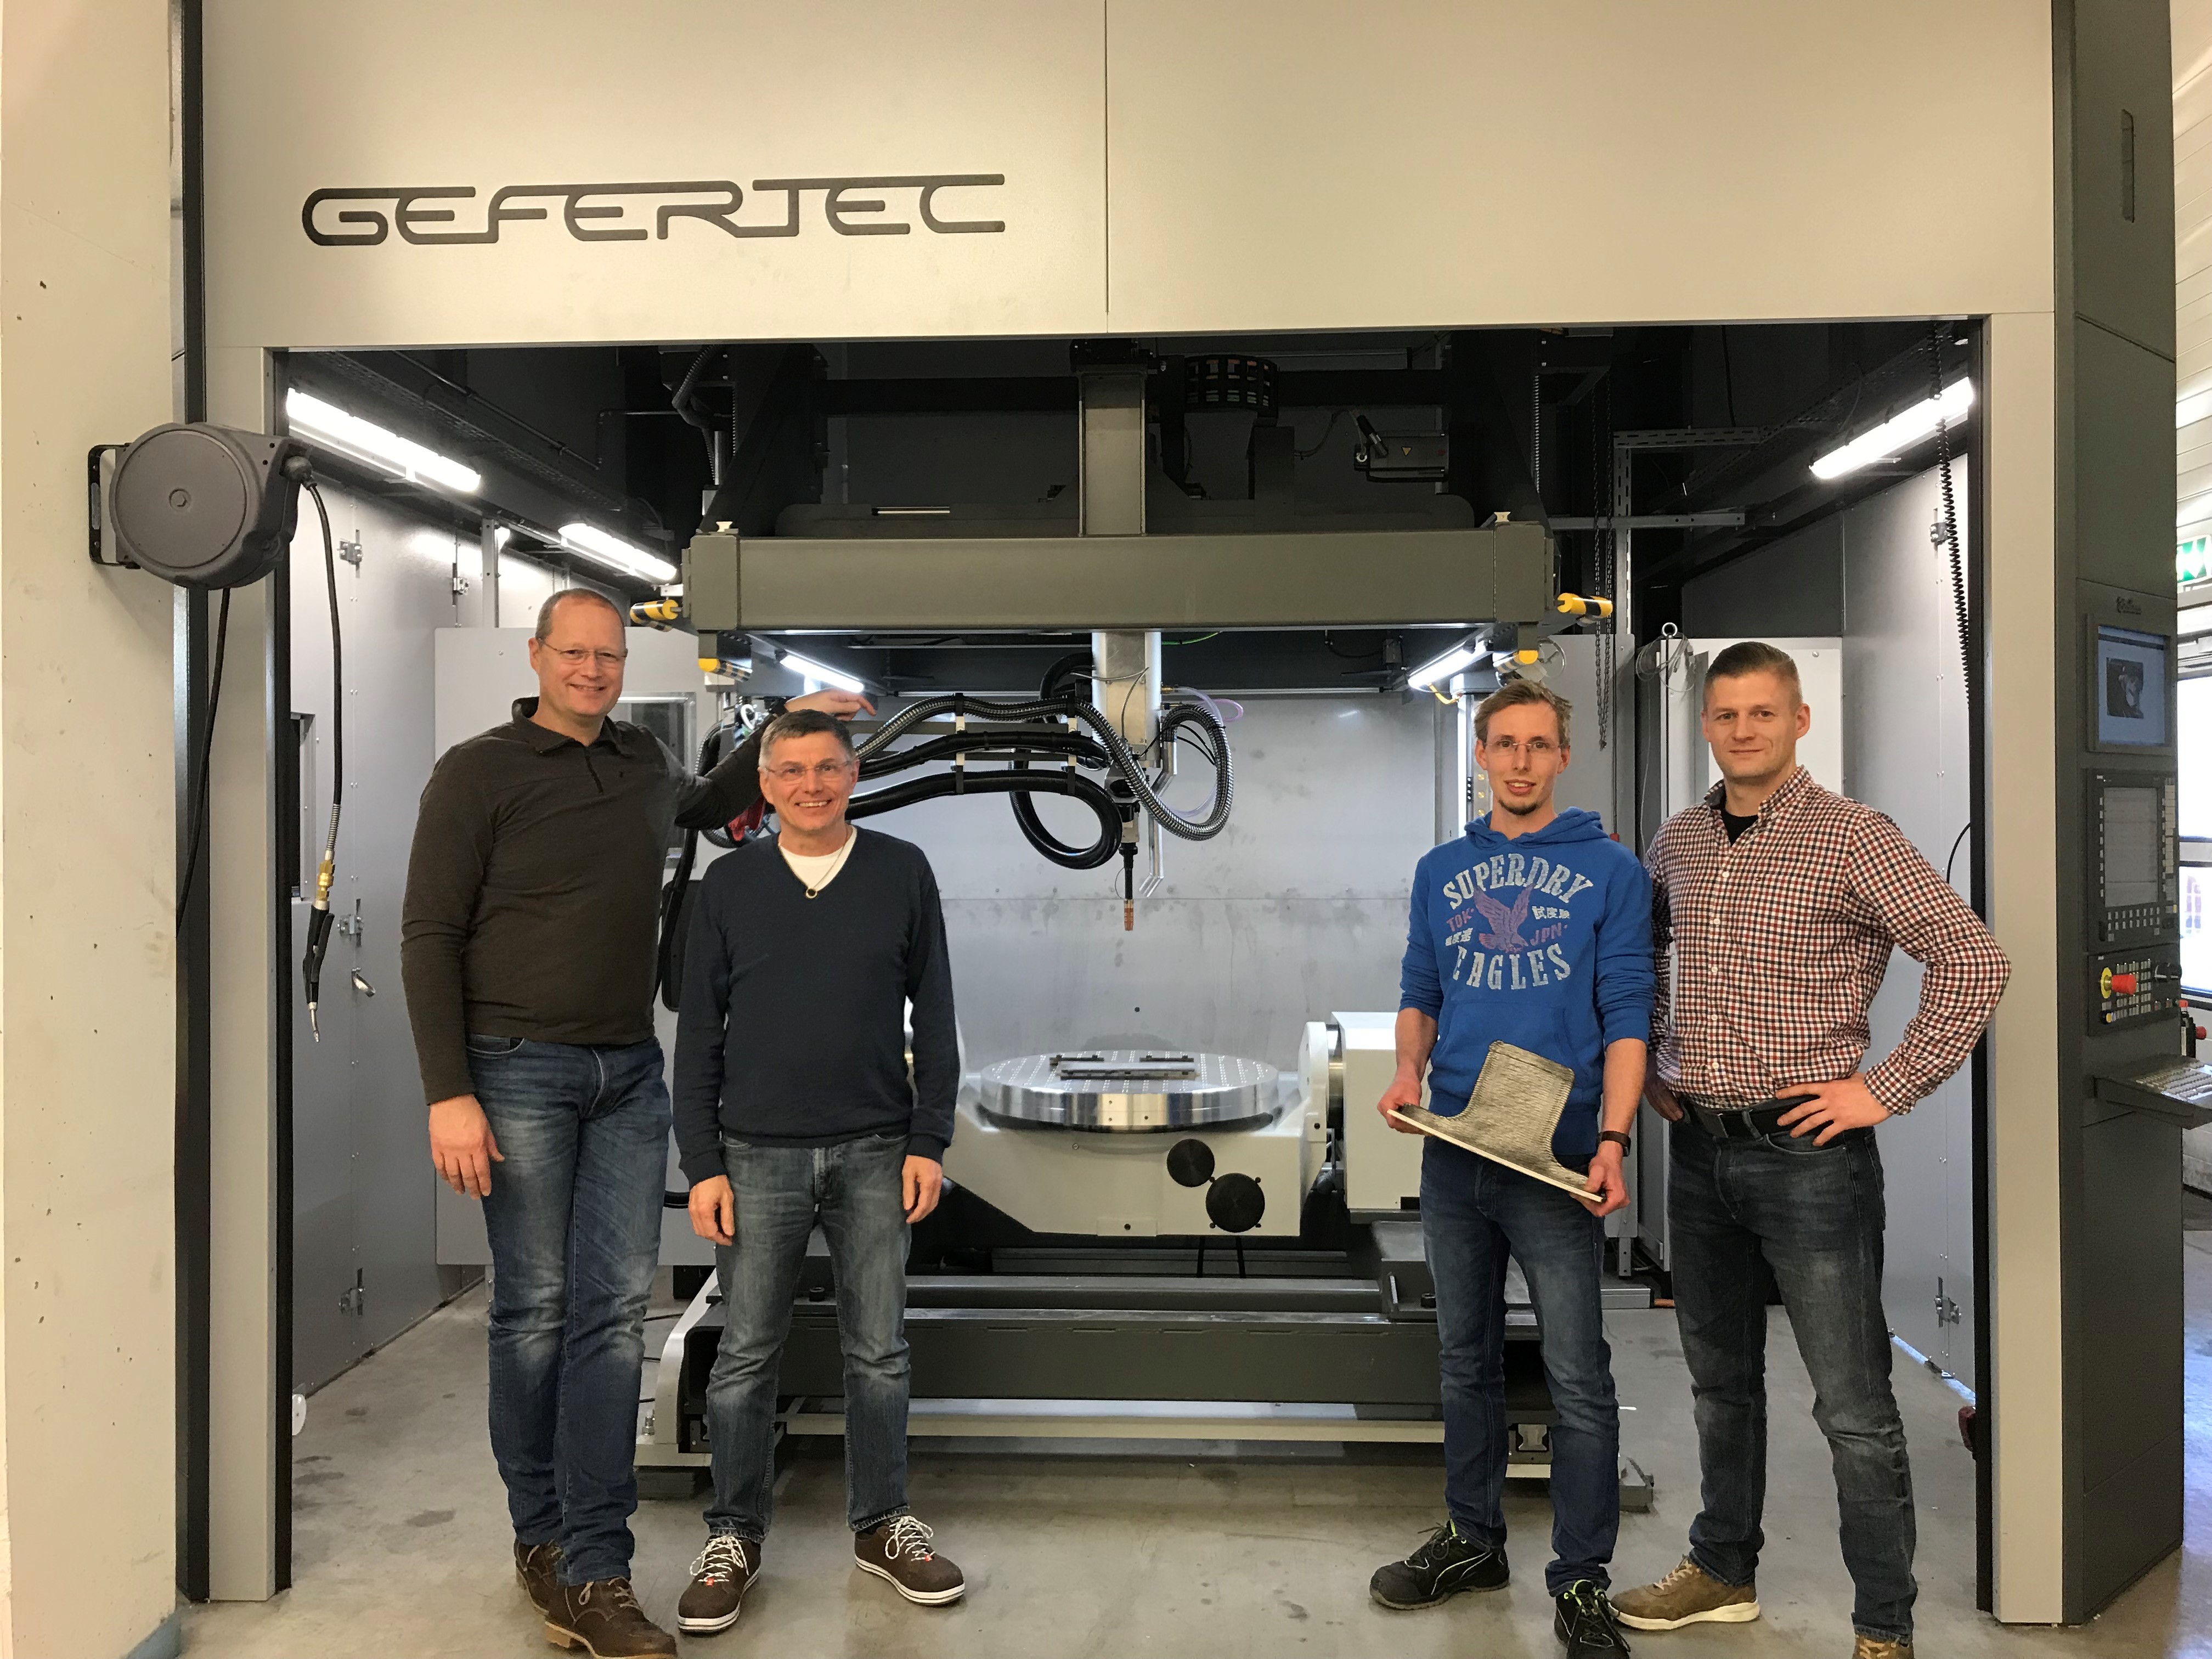 Aircraft Philipp Group installs an Arc605 3D printer at its facility in Übersee, Germany. Photo via GEFERTEC.